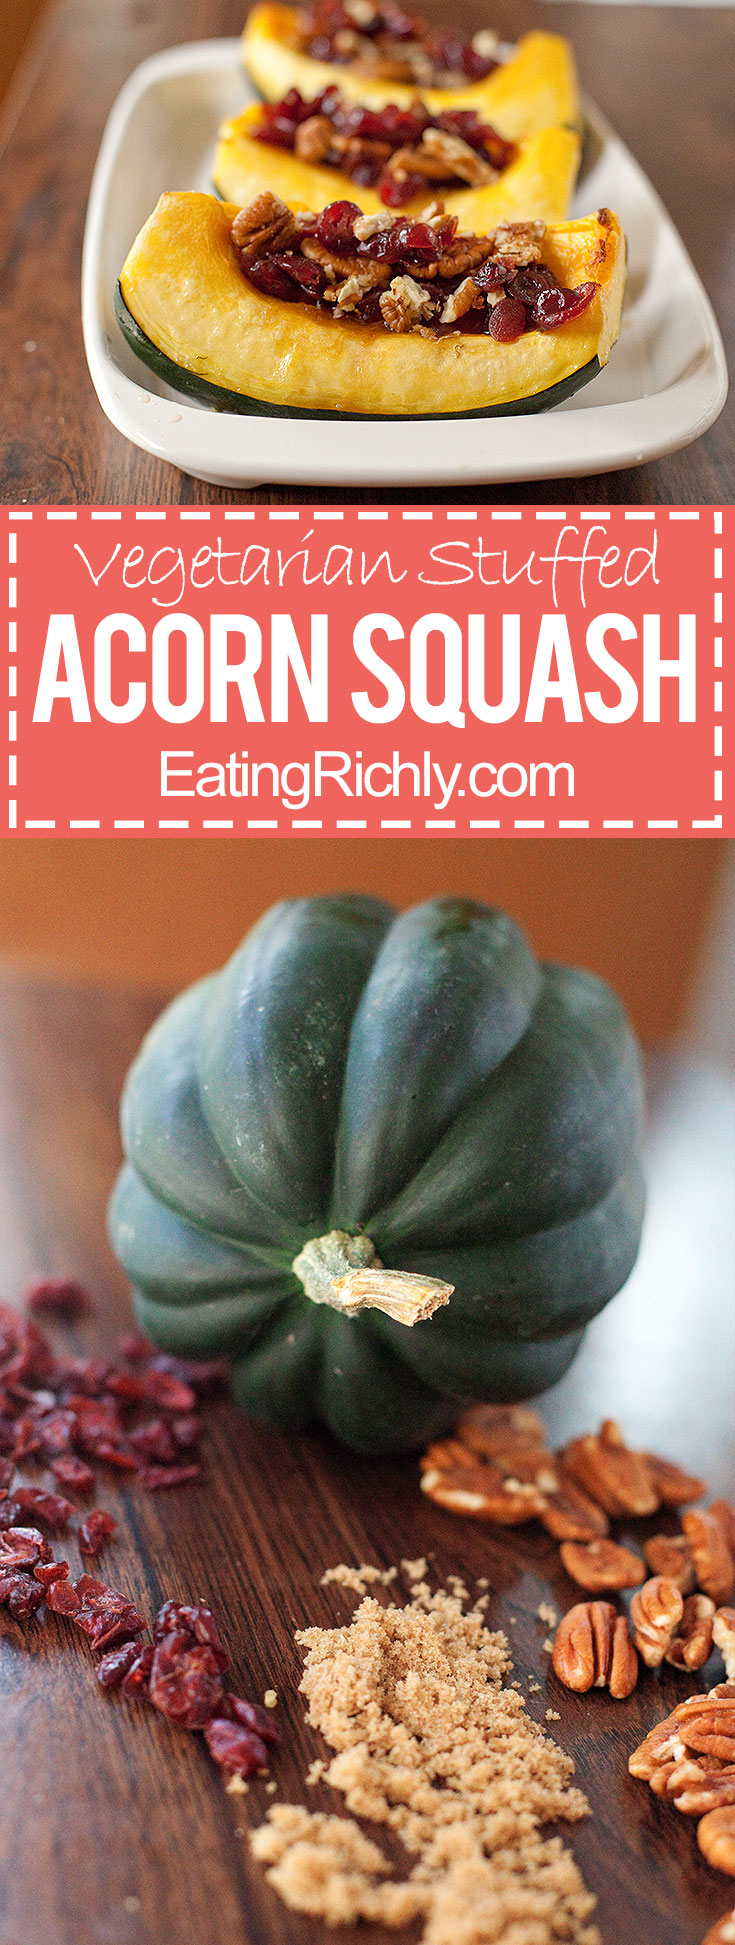 Vegetarian recipe for stuffed acorn squash that tastes like fall. Roasted acorn squash stuffed with crunchy pecans, tangy cranberries, & sweet brown sugar. From EatingRichly.com